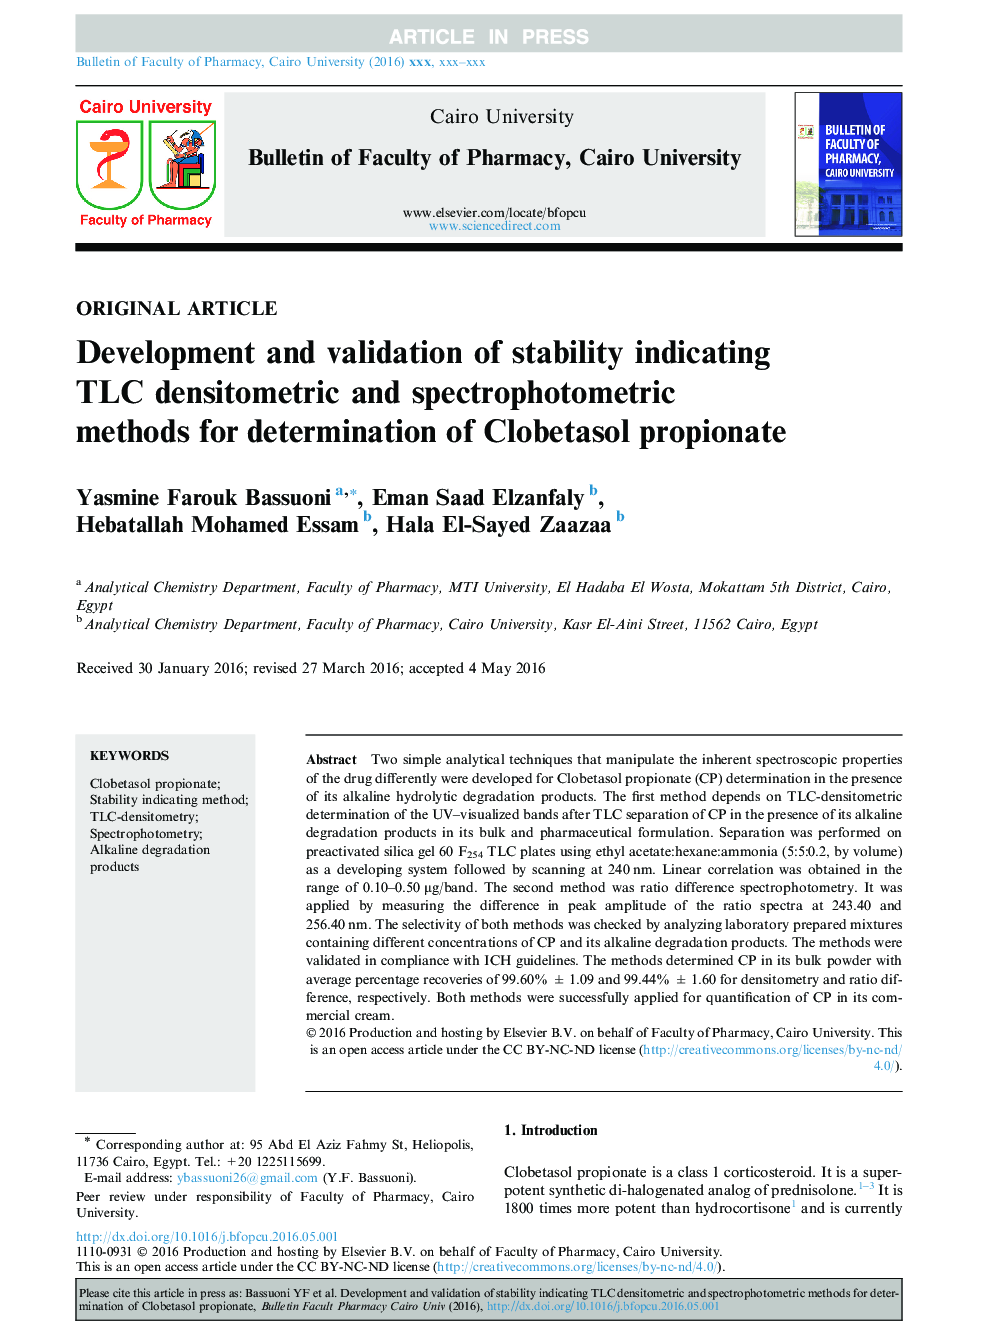 Development and validation of stability indicating TLC densitometric and spectrophotometric methods for determination of Clobetasol propionate